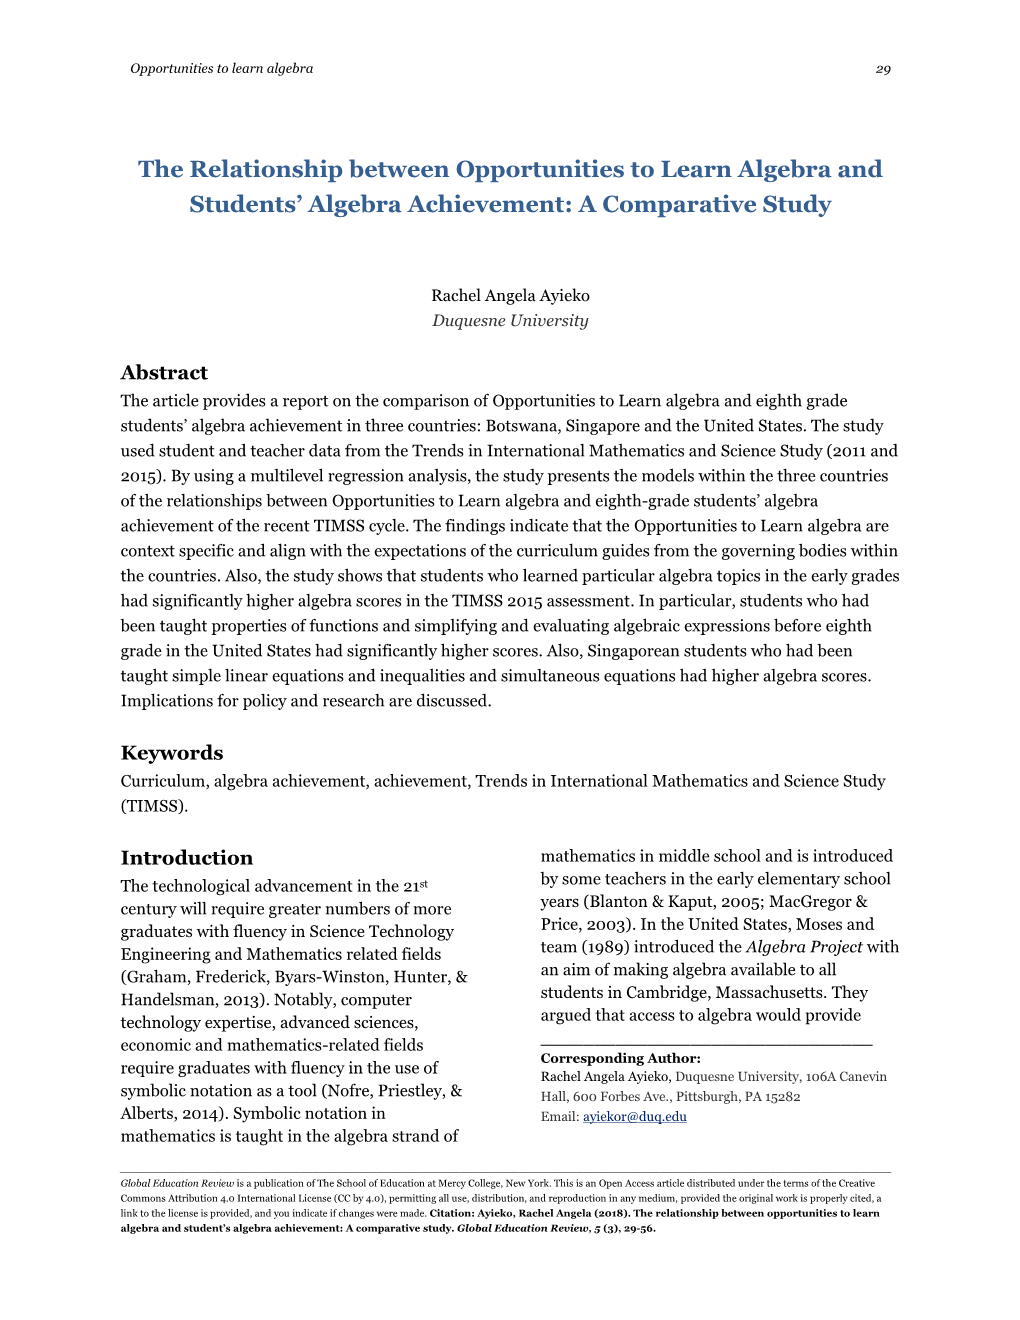 The Relationship Between Opportunities to Learn Algebra and Students’ Algebra Achievement: a Comparative Study